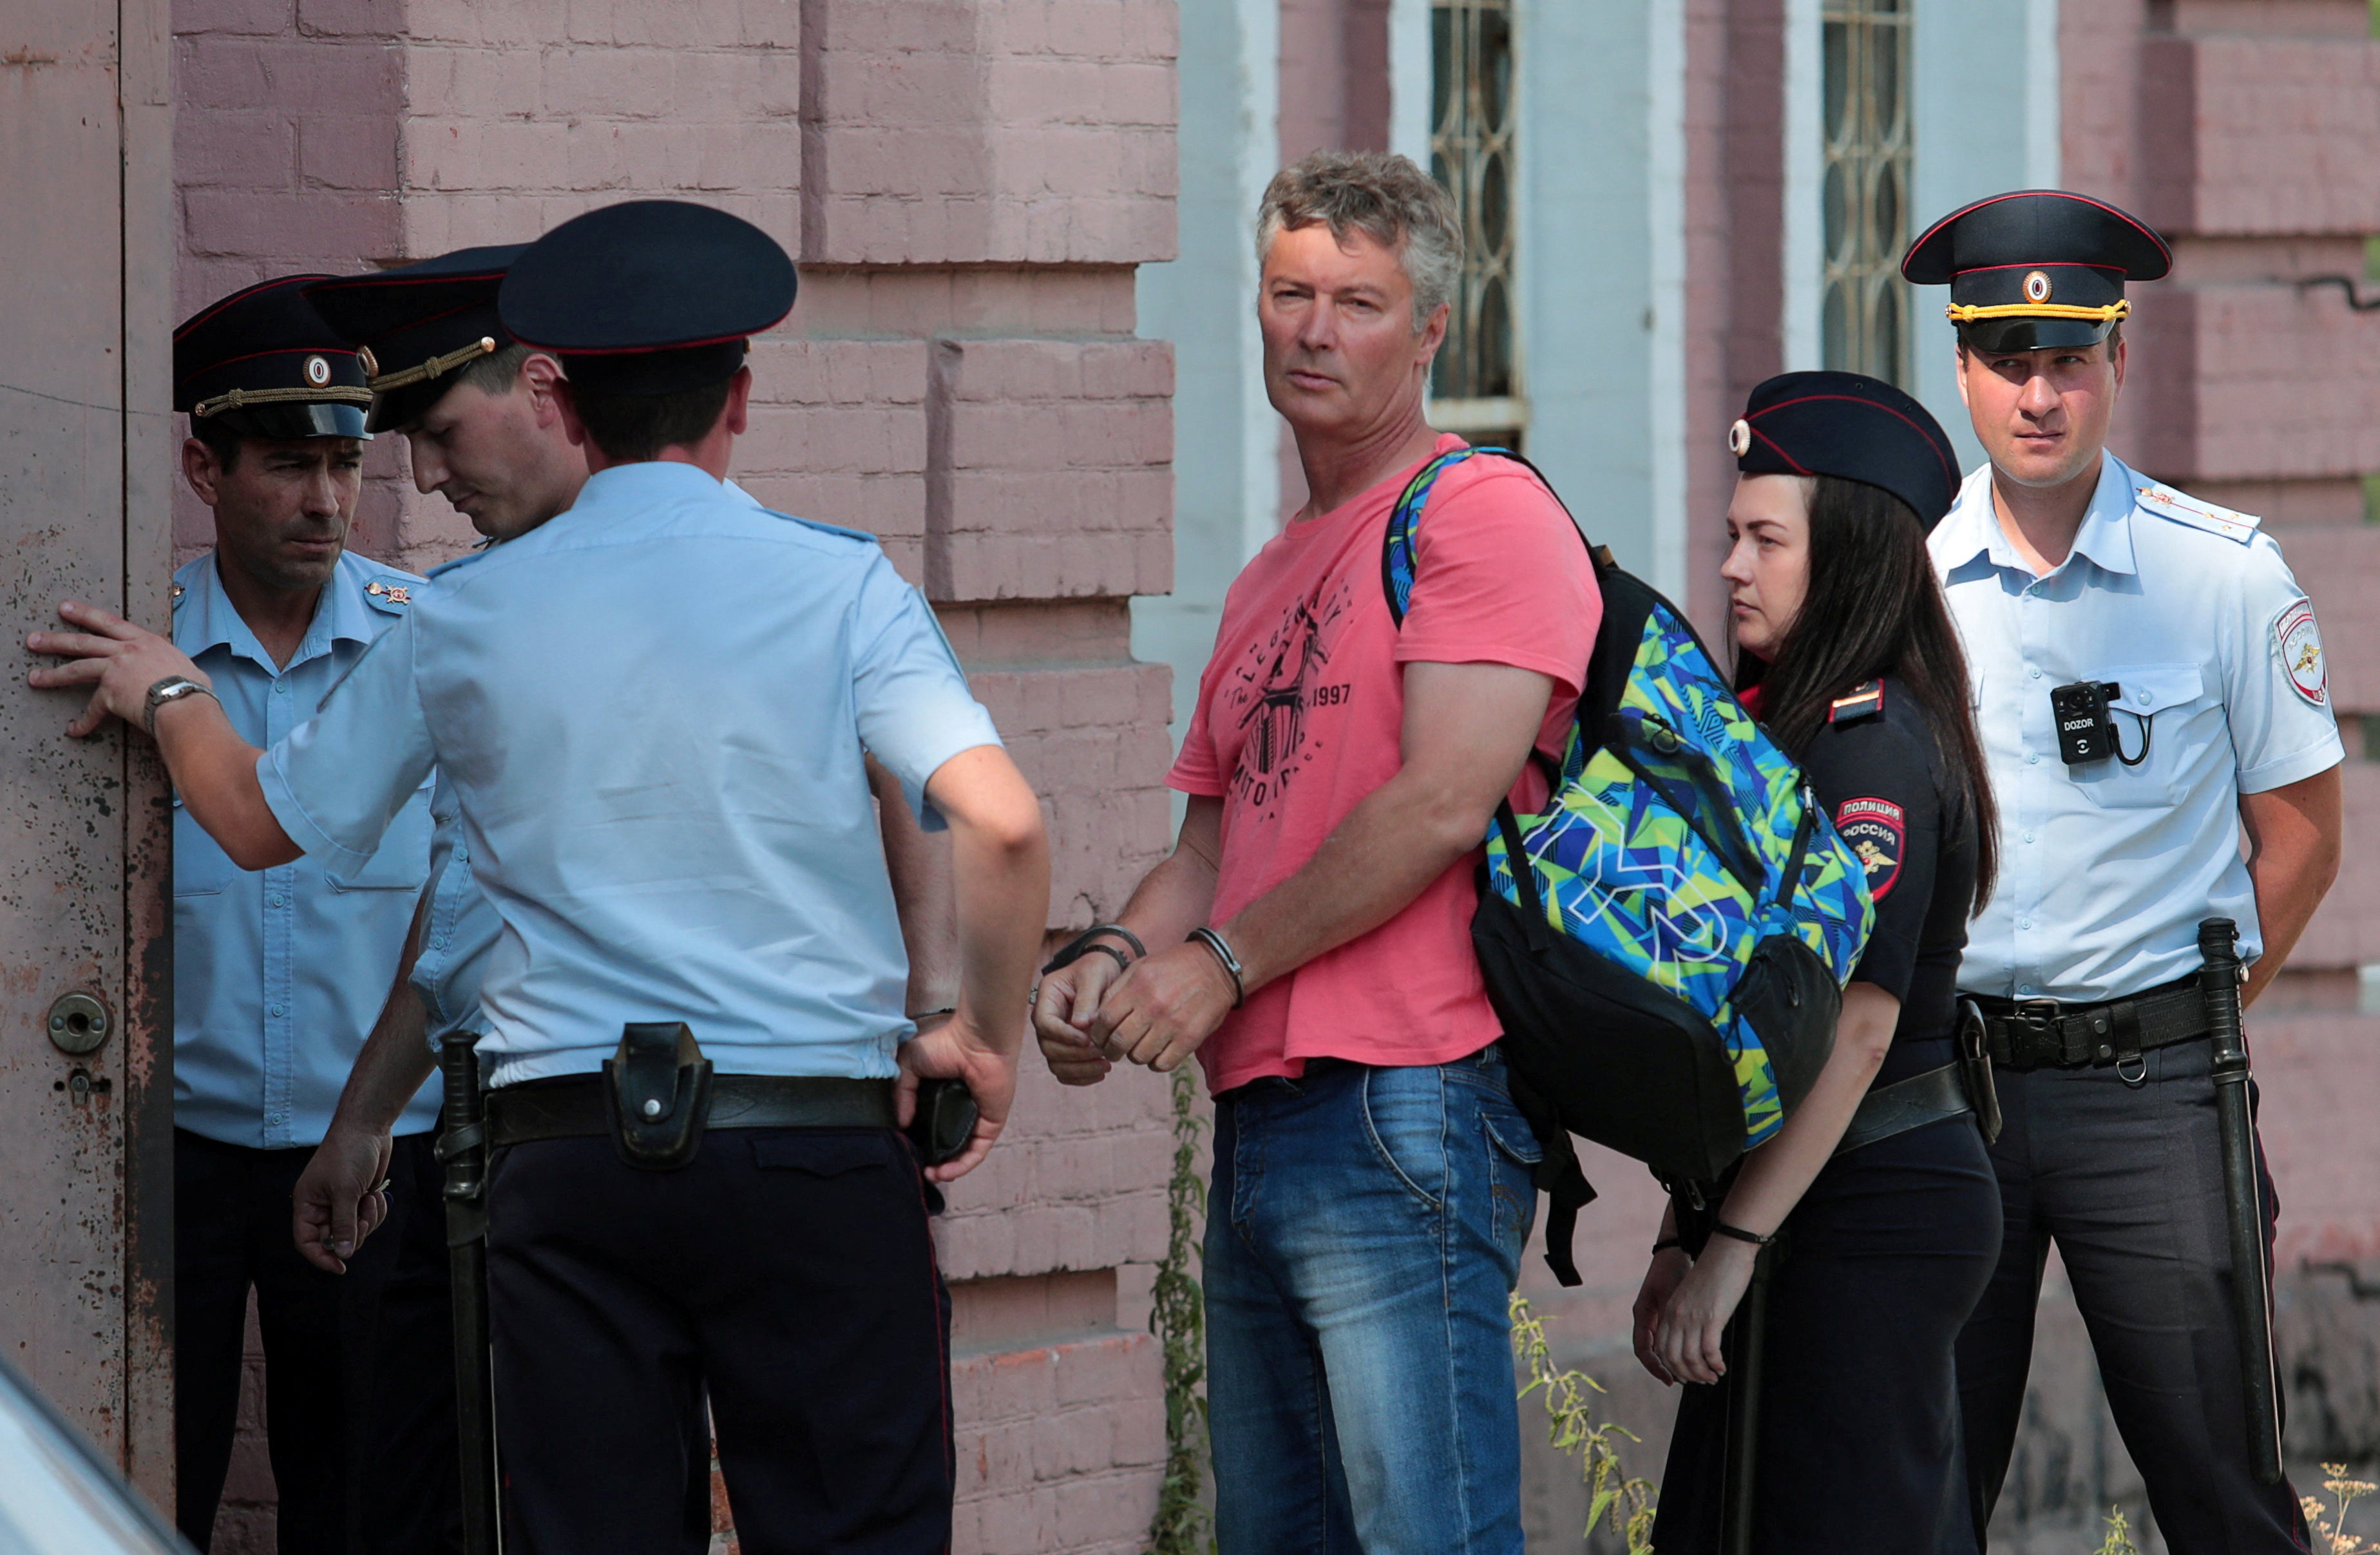 Kremlin critic Yevgeny Roizman is escorted to a court building in Yekaterinburg, Russia, on 25 August, 2022.